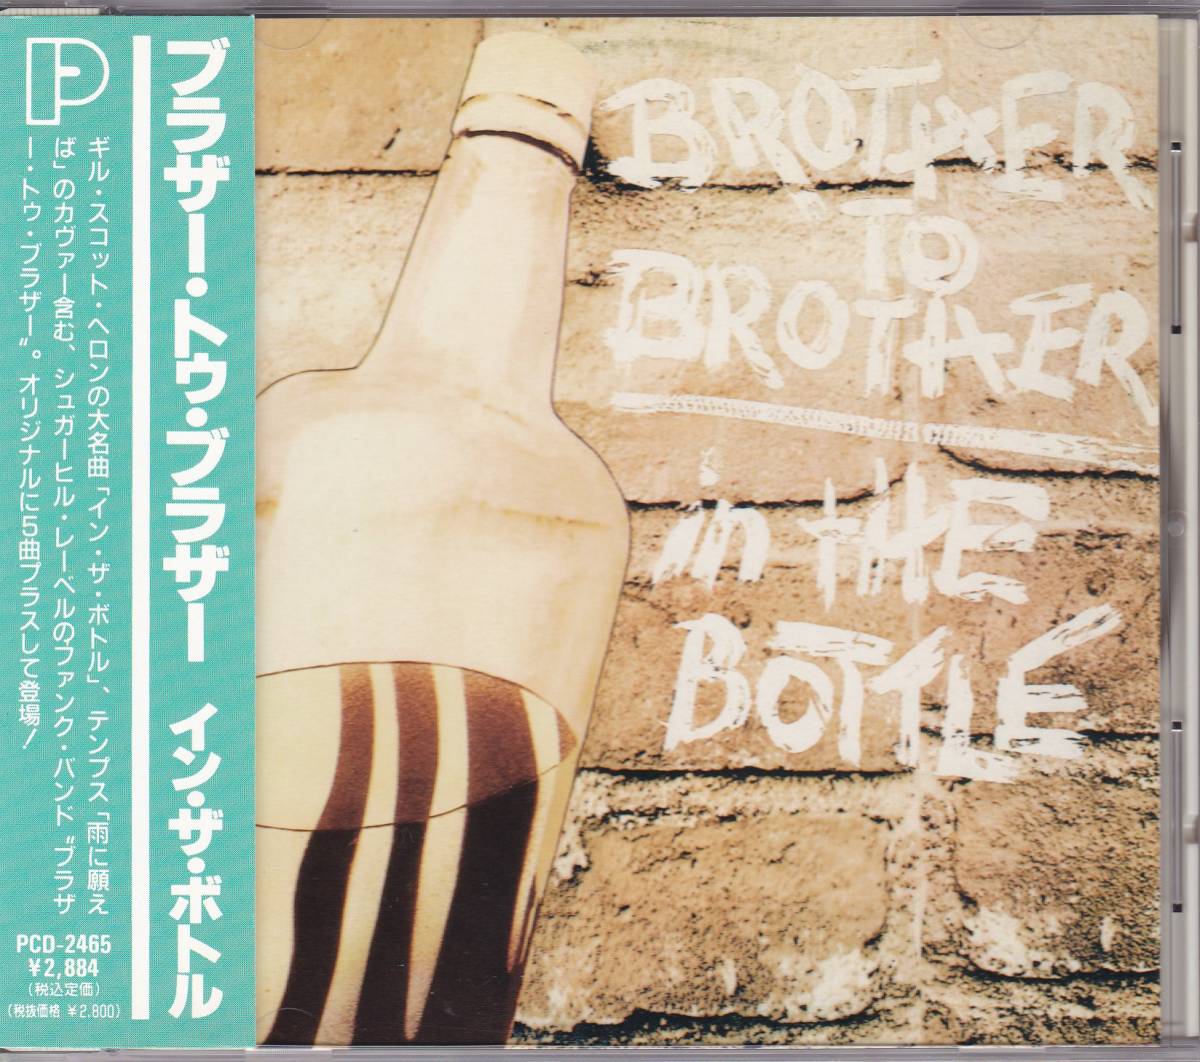 Rare Groove/ファンク/ソウル■BROTHER TO BROTHER / In The Bottle +5 (1974) レア廃盤 AtoZディスクガイド掲載作!! 唯一のCD化盤 Moments_画像1